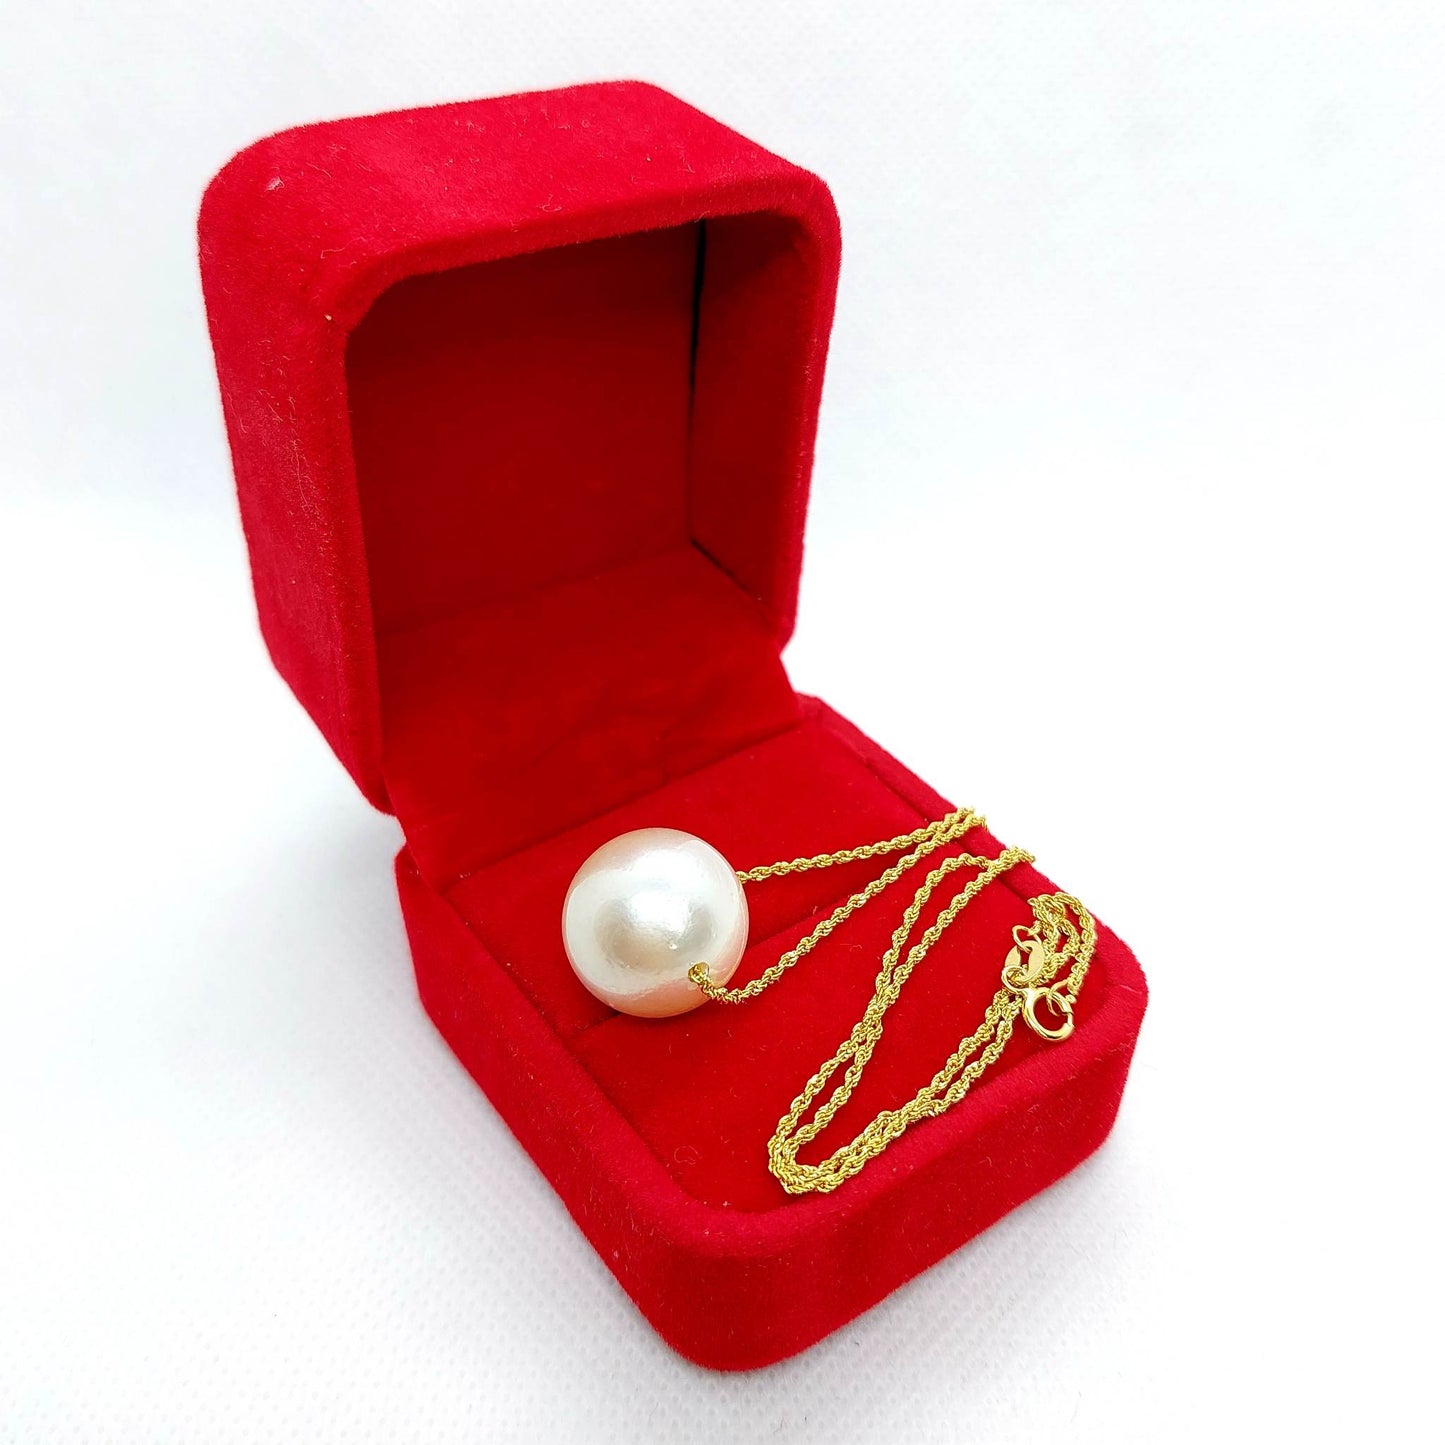 Natural South Sea Floating Pearl Pendant - 16mm - Solid 18K Gold